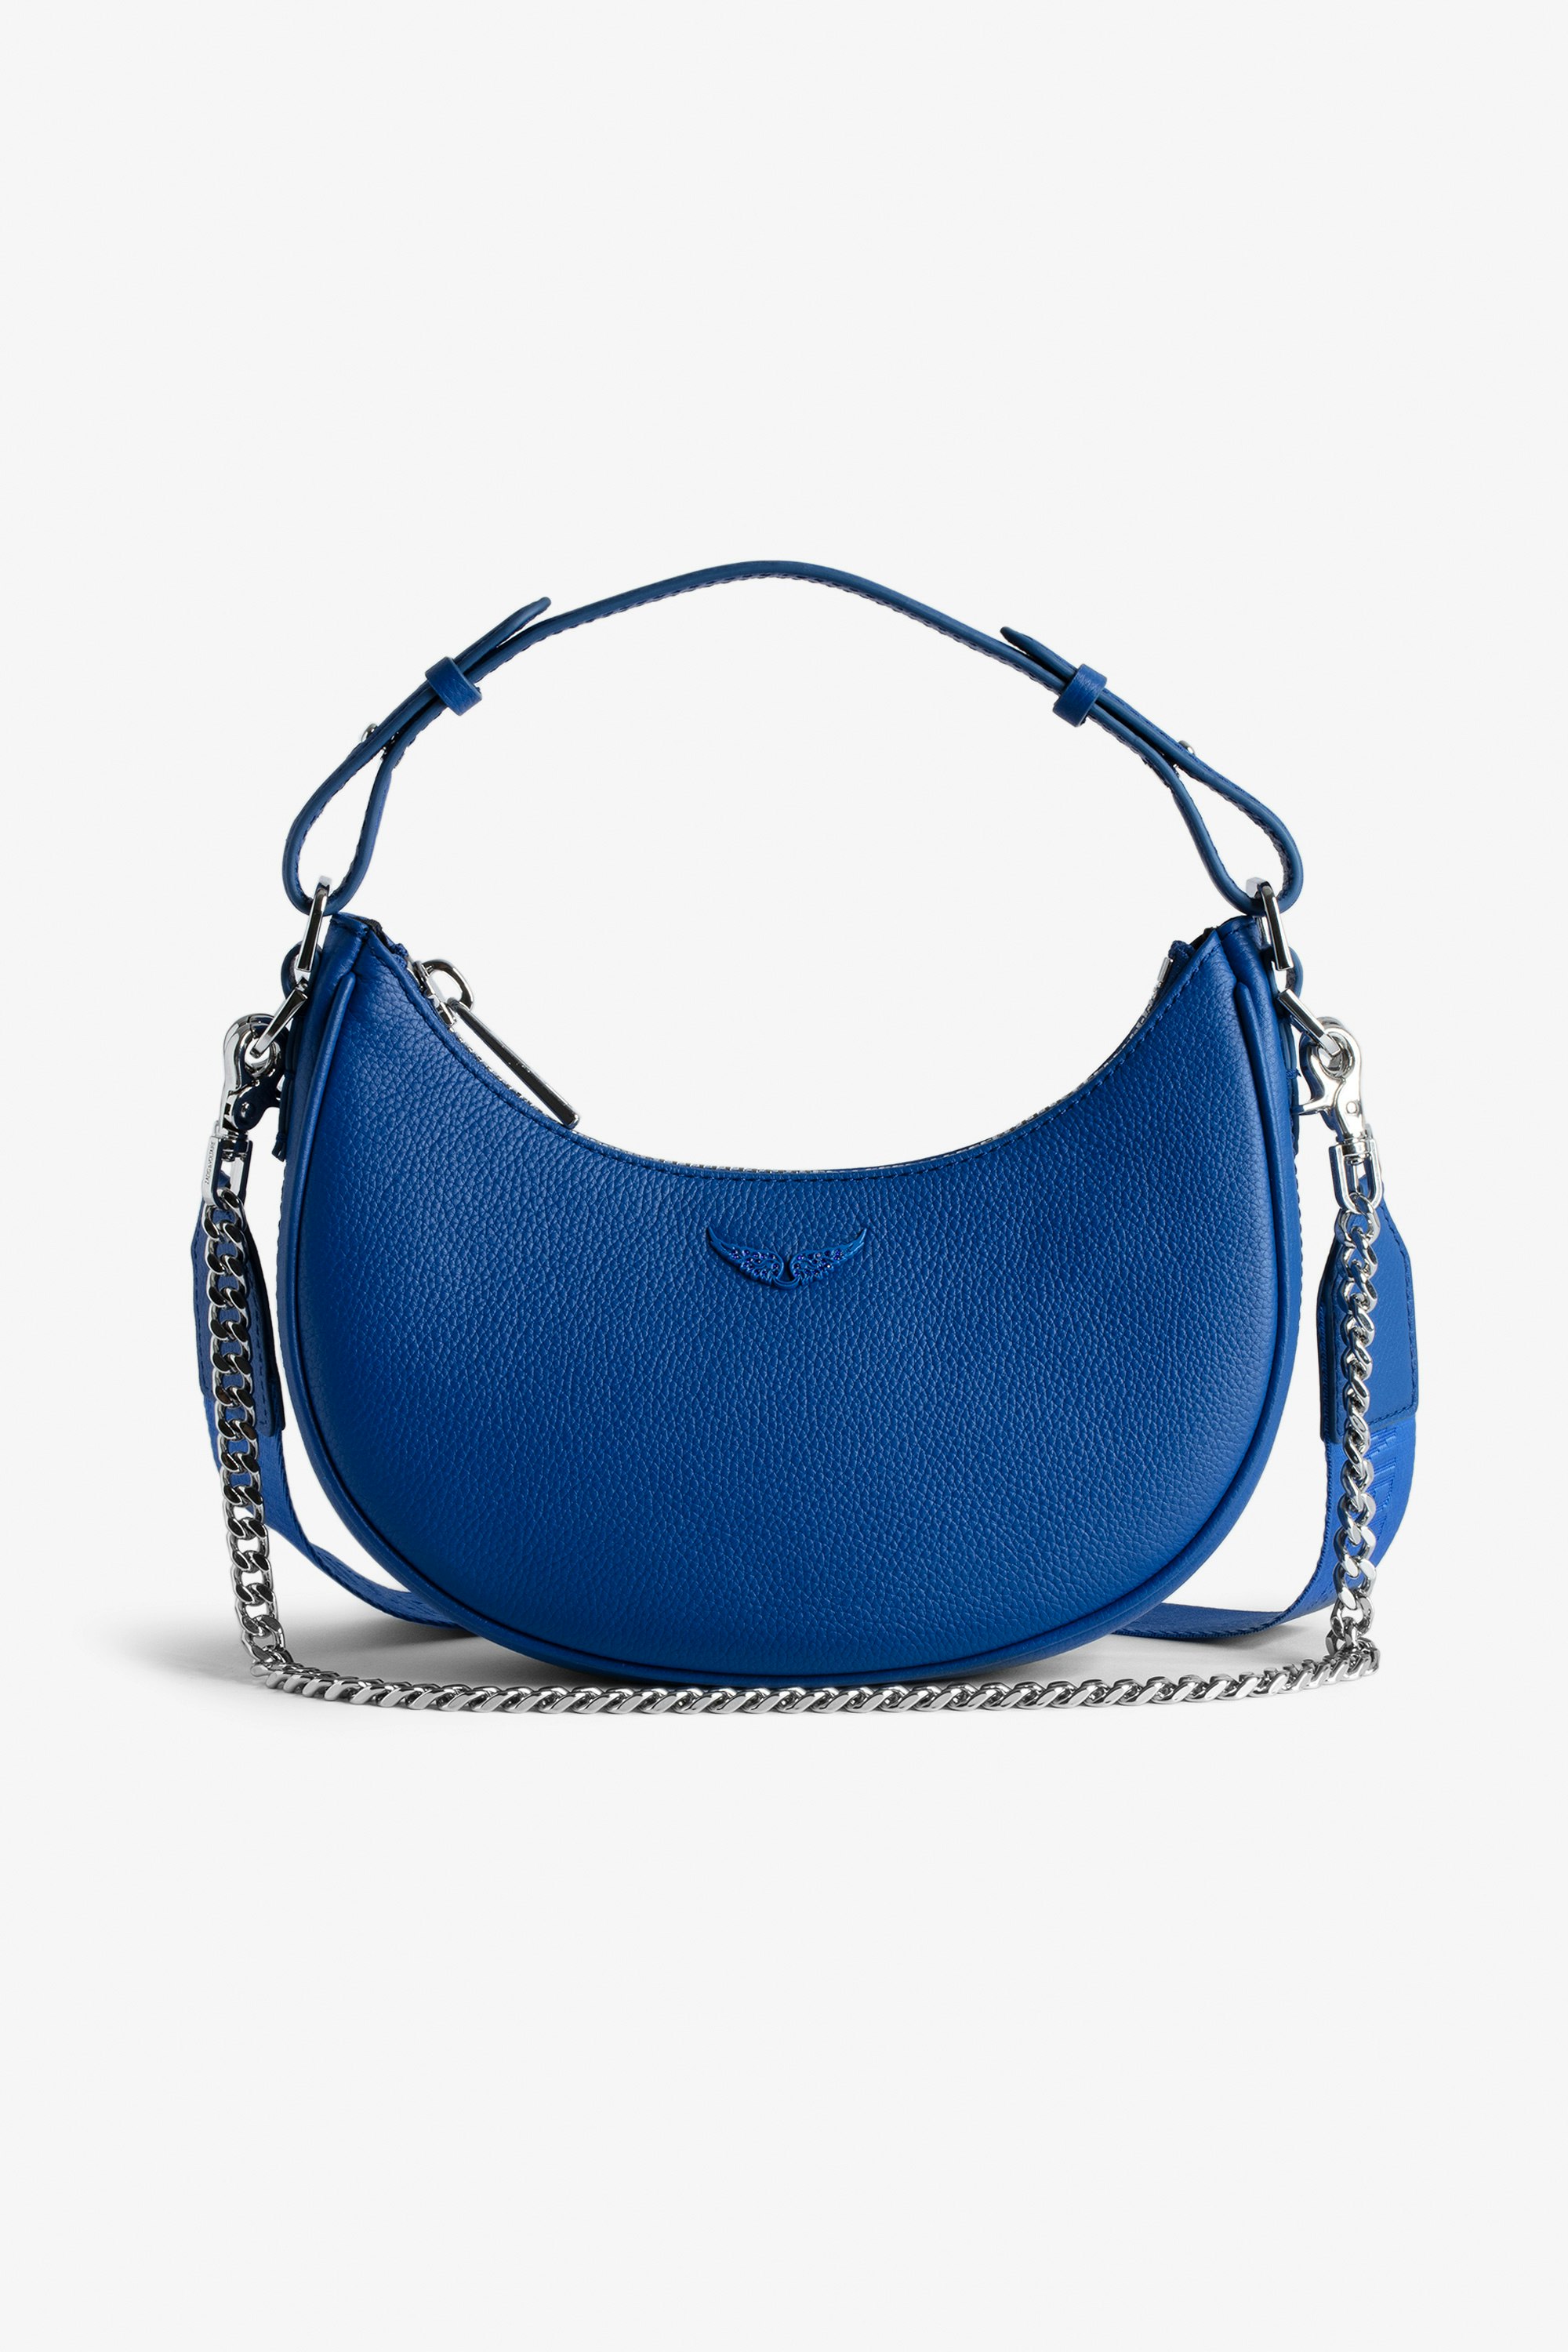 Moonrock Bag - Women’s half-moon bag in blue grained leather with a short handle, shoulder strap, chain and signature wings.